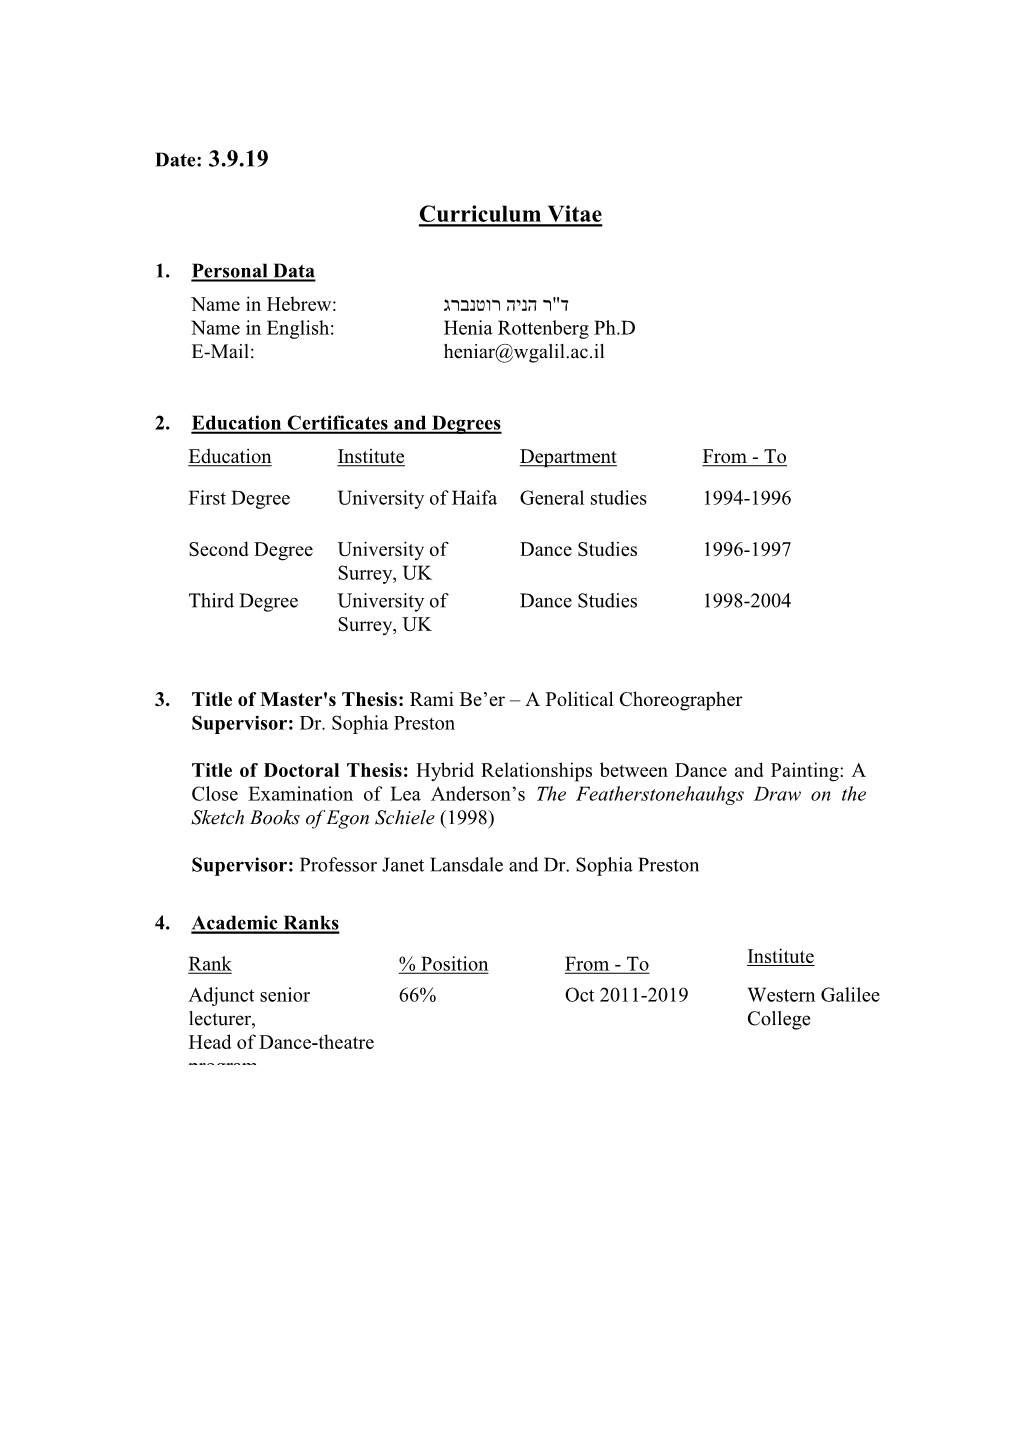 Curriculum Vitae and List of Publications